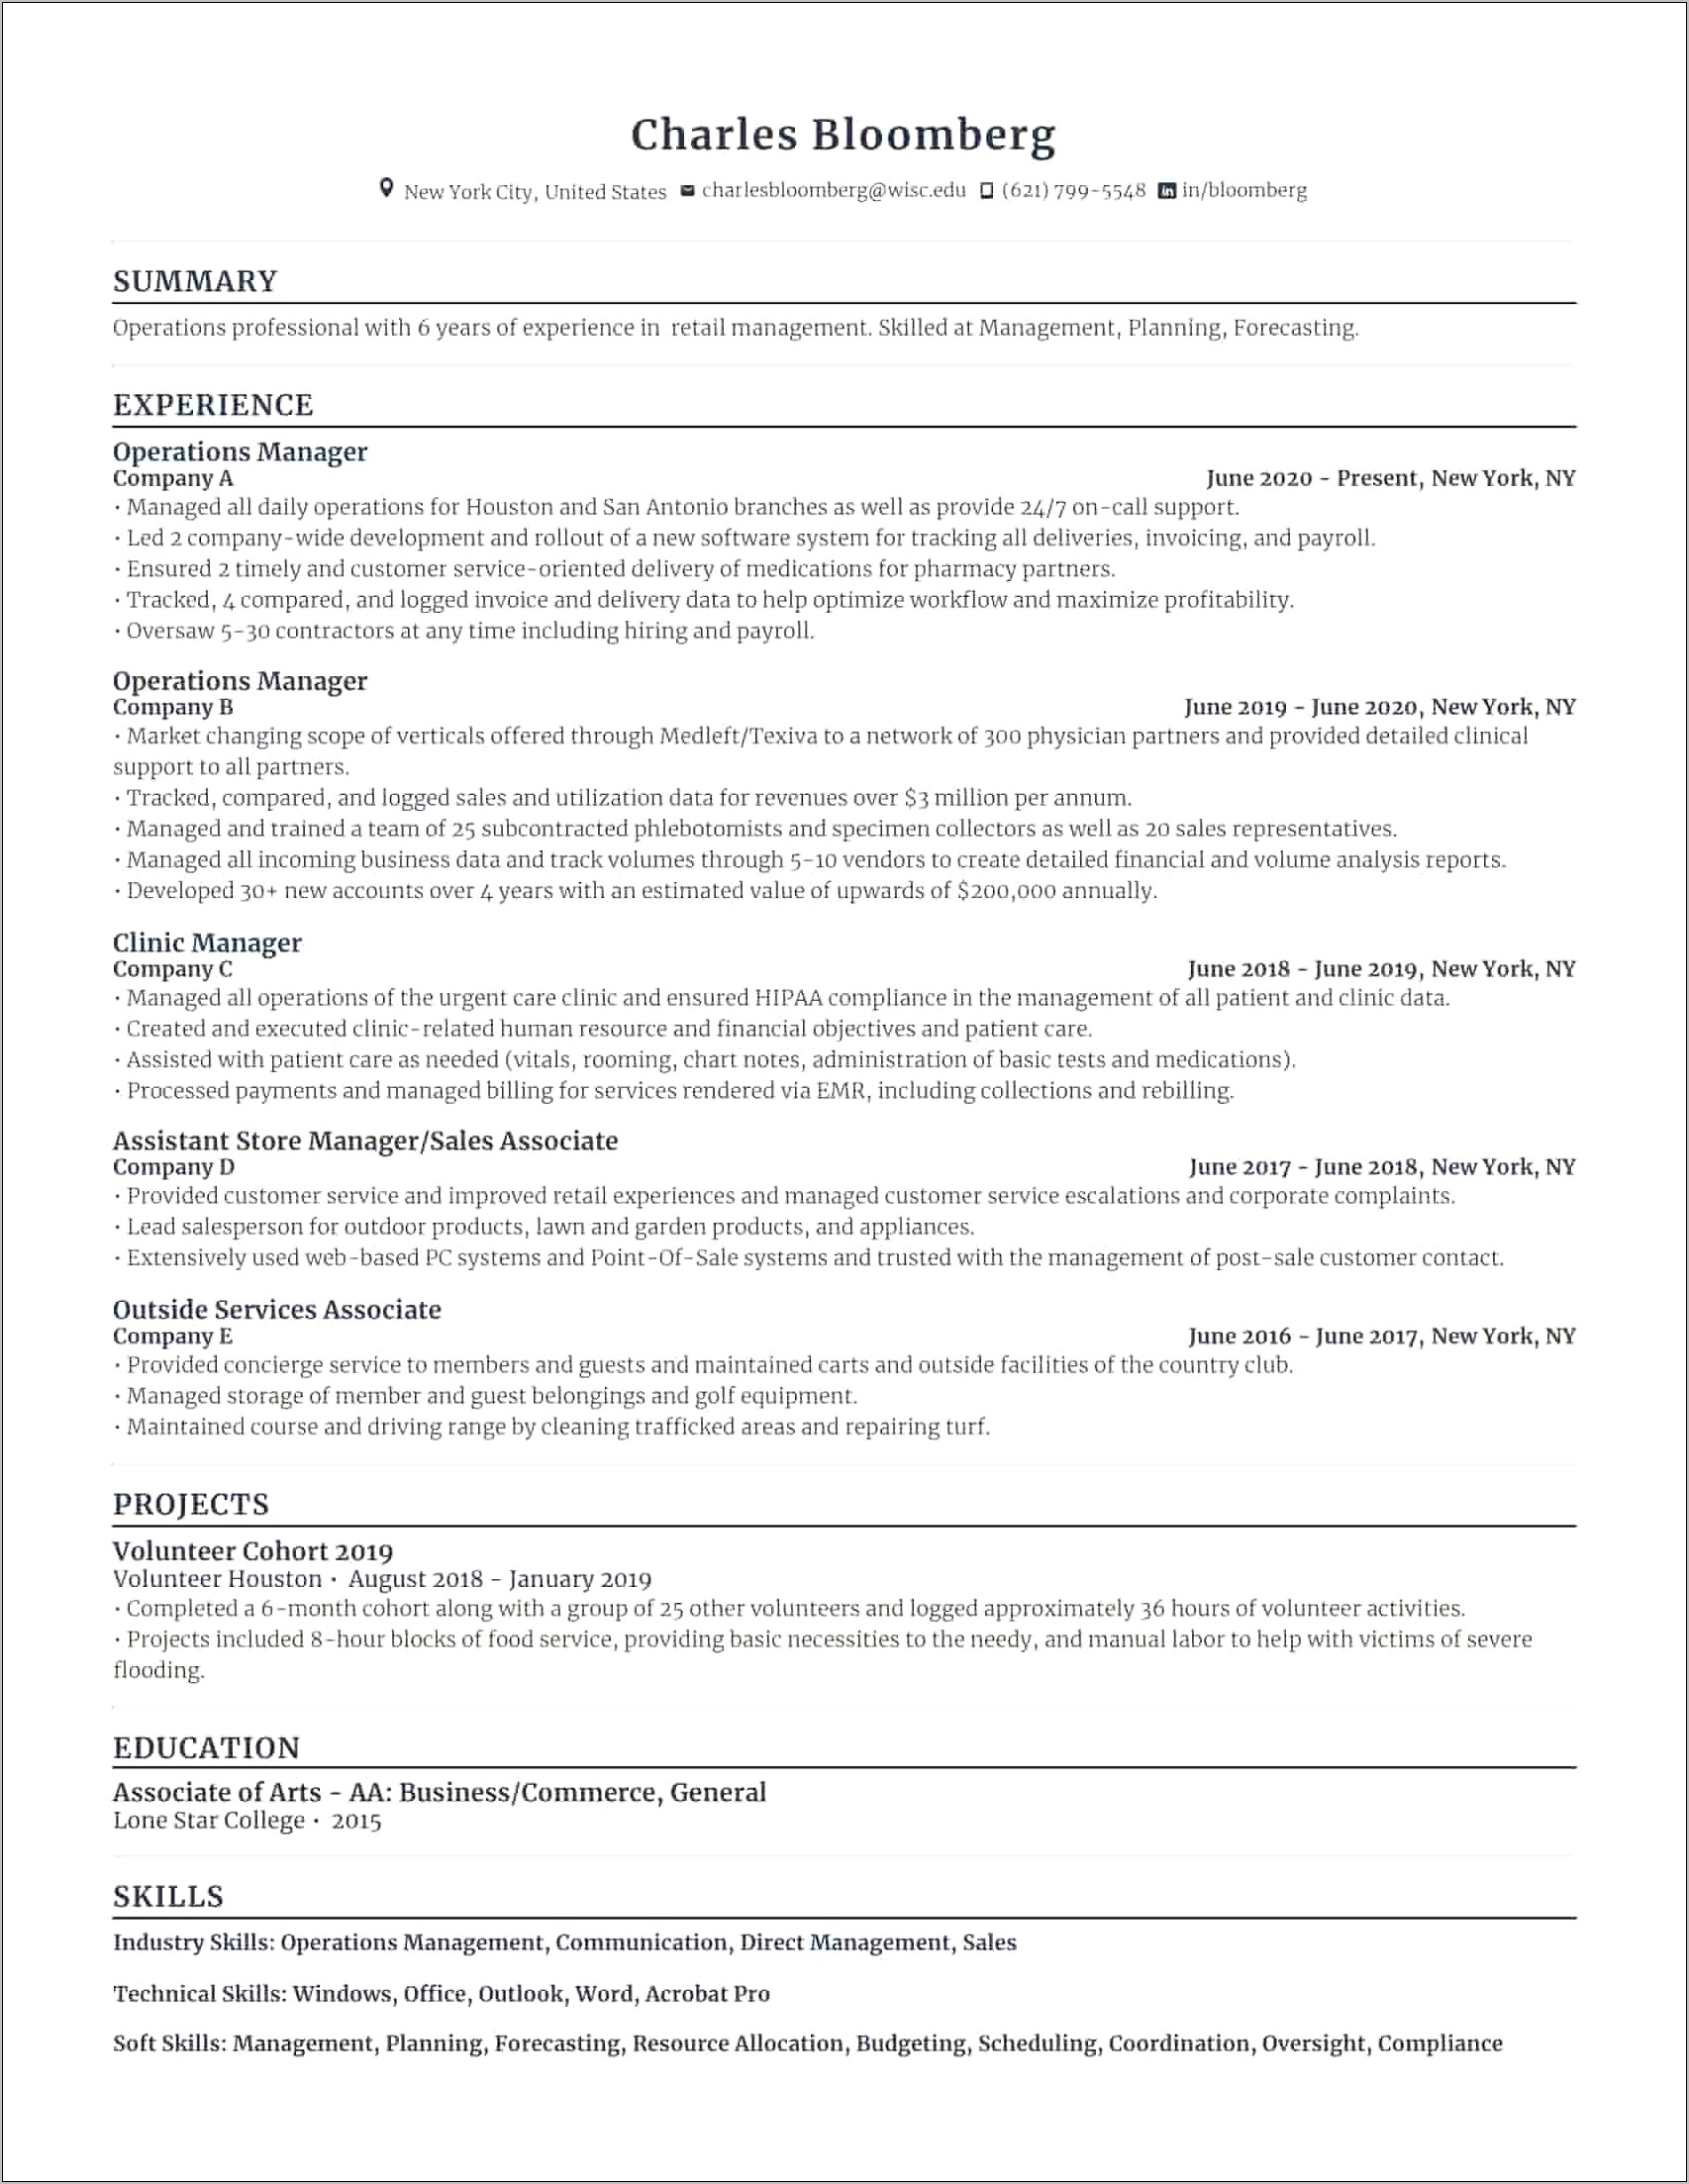 Business Management Professional Manager Resume